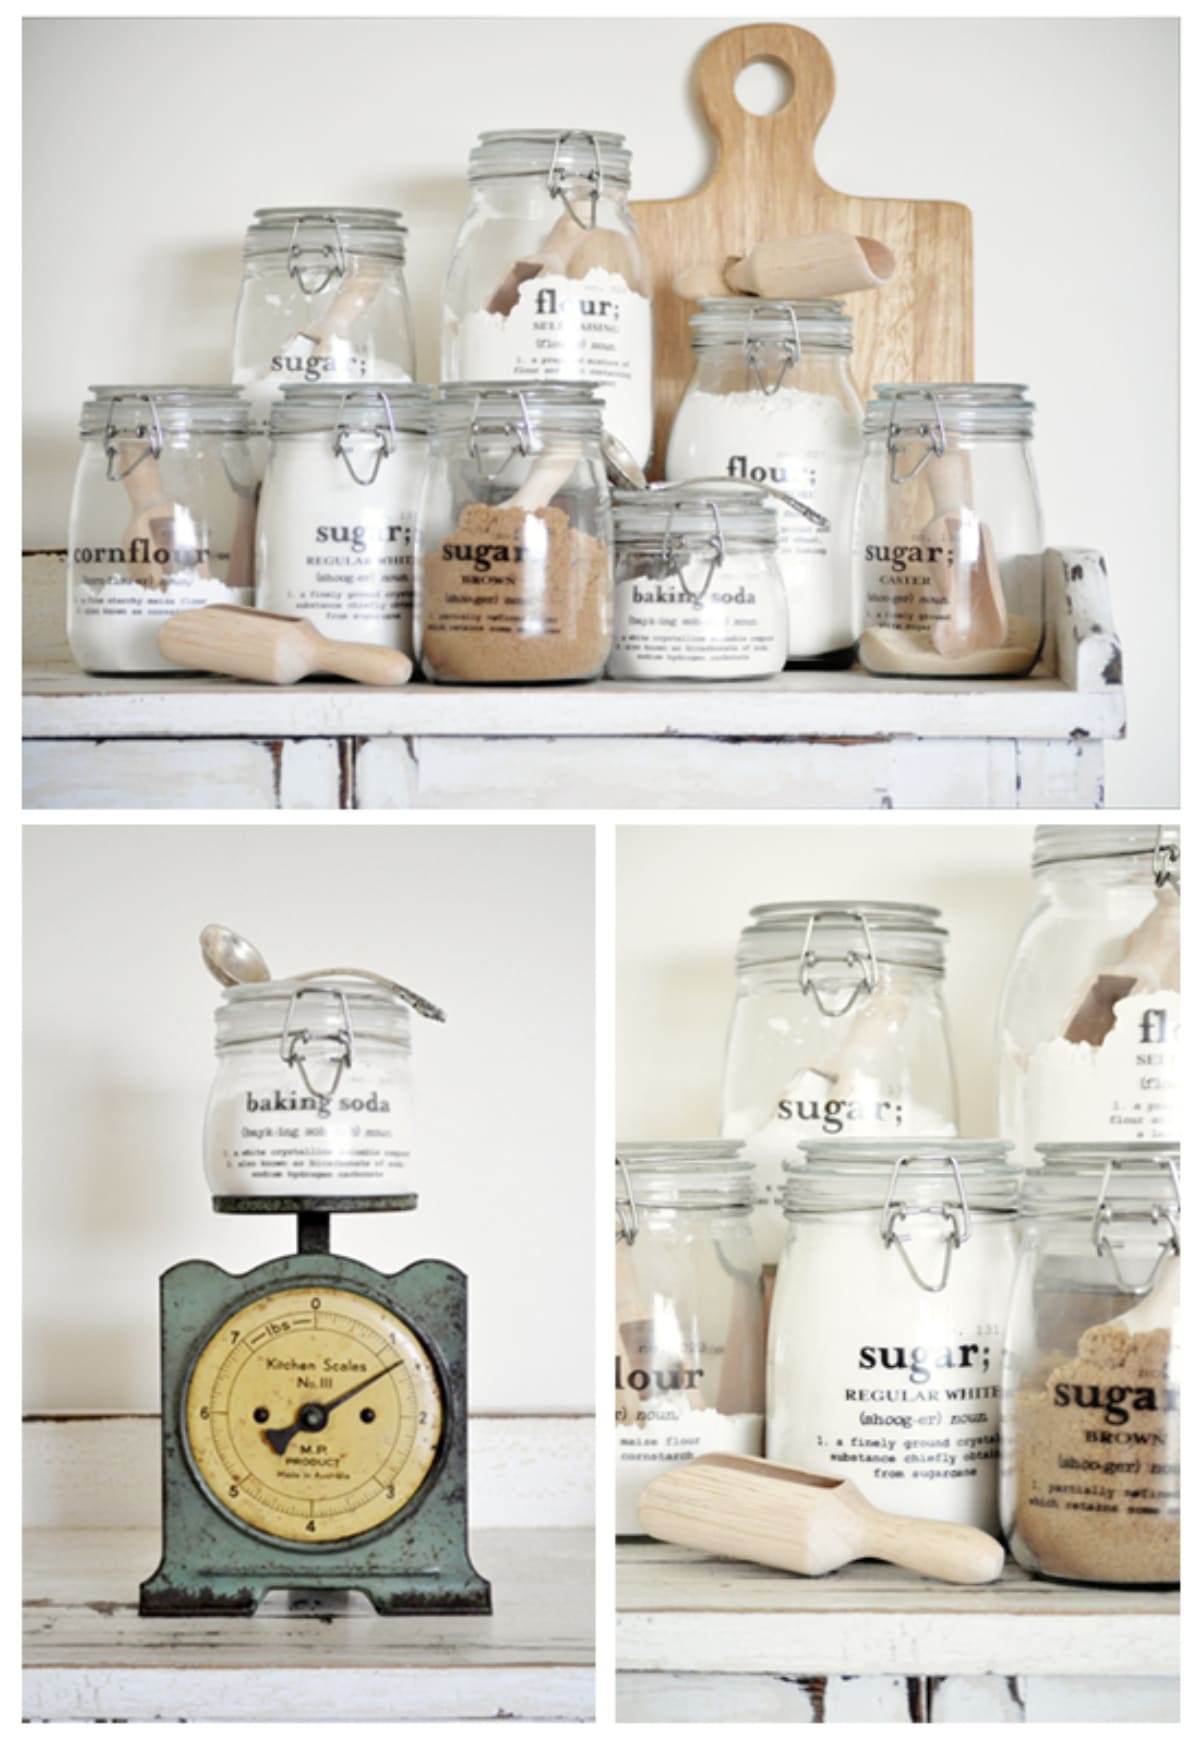 Collage of jar labels in the kitchen.